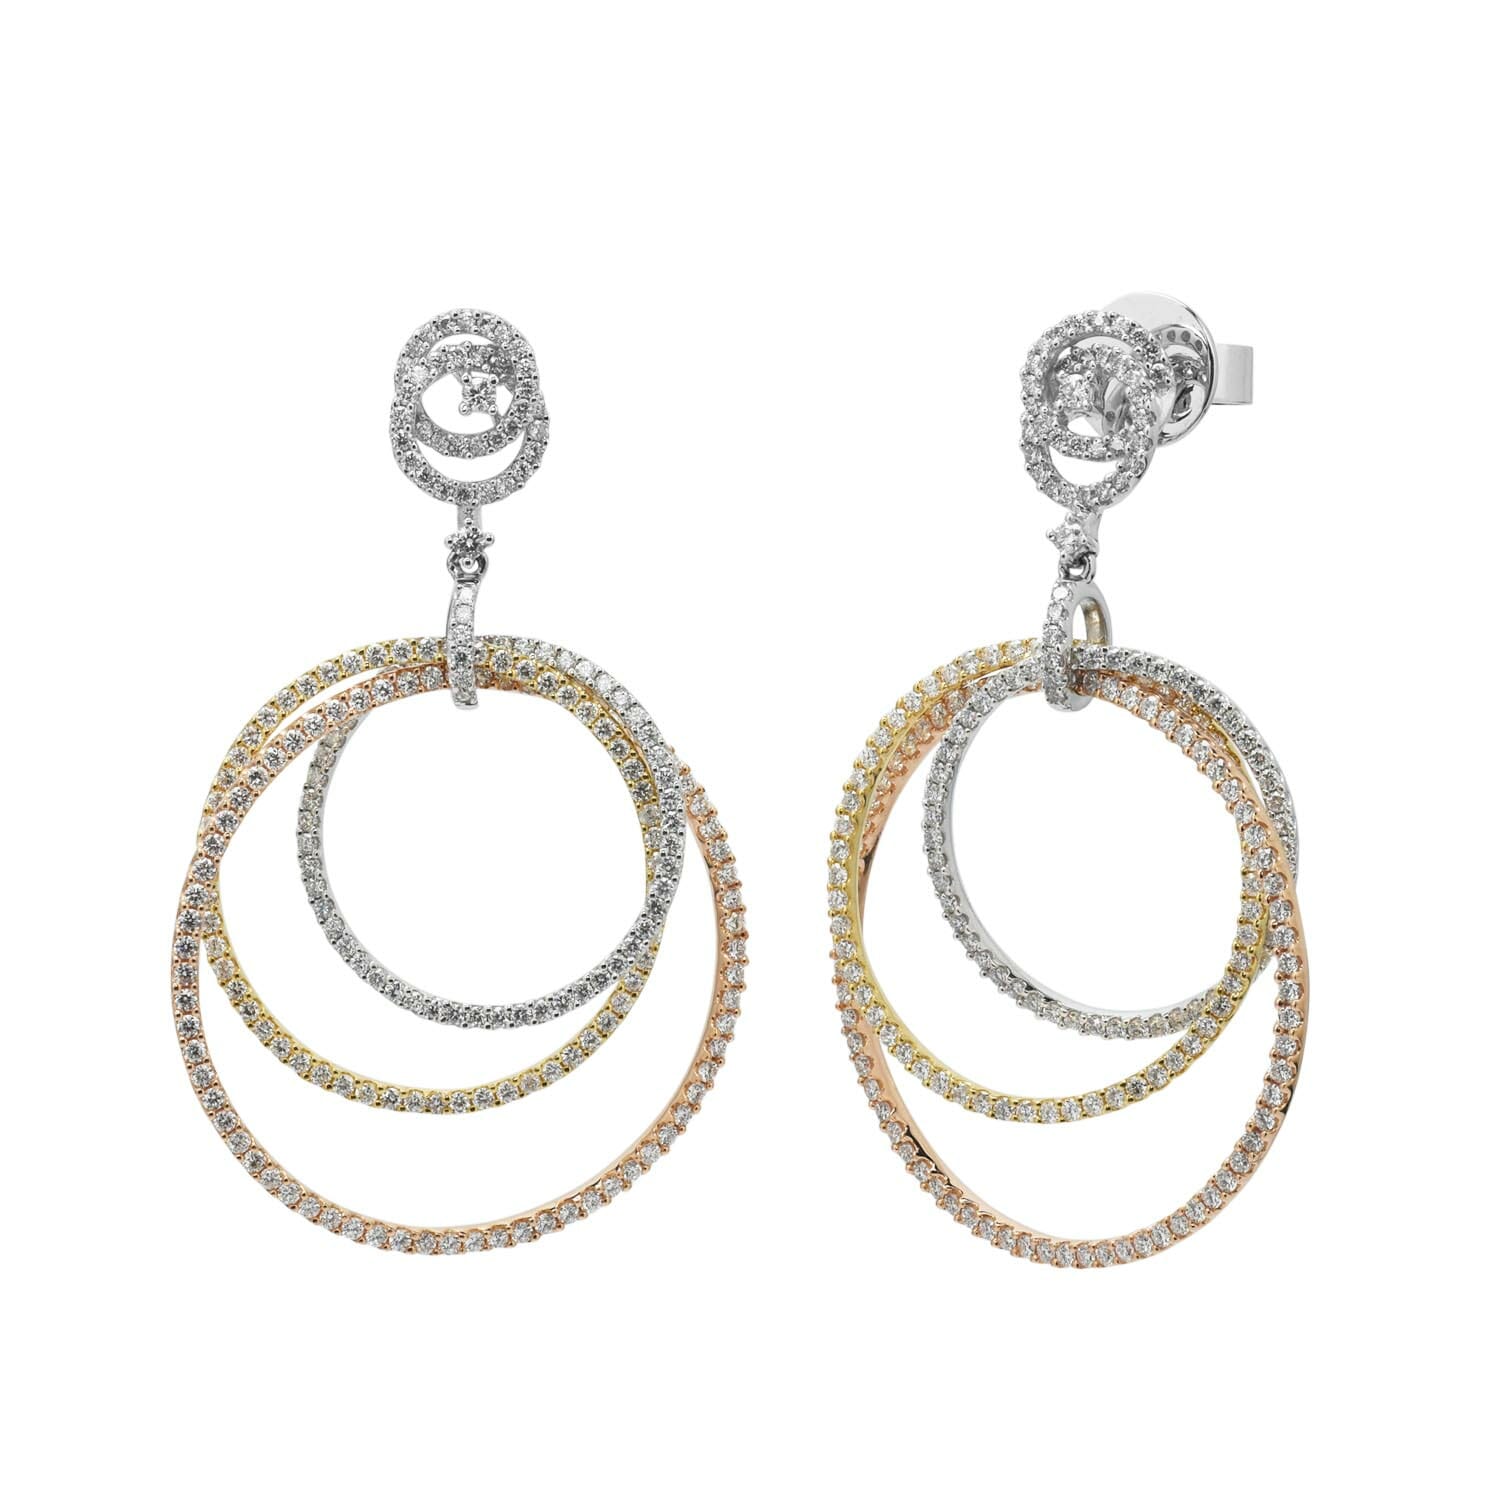 Diamond Circle Earrings in 18kt White Yellow and Rose Gold